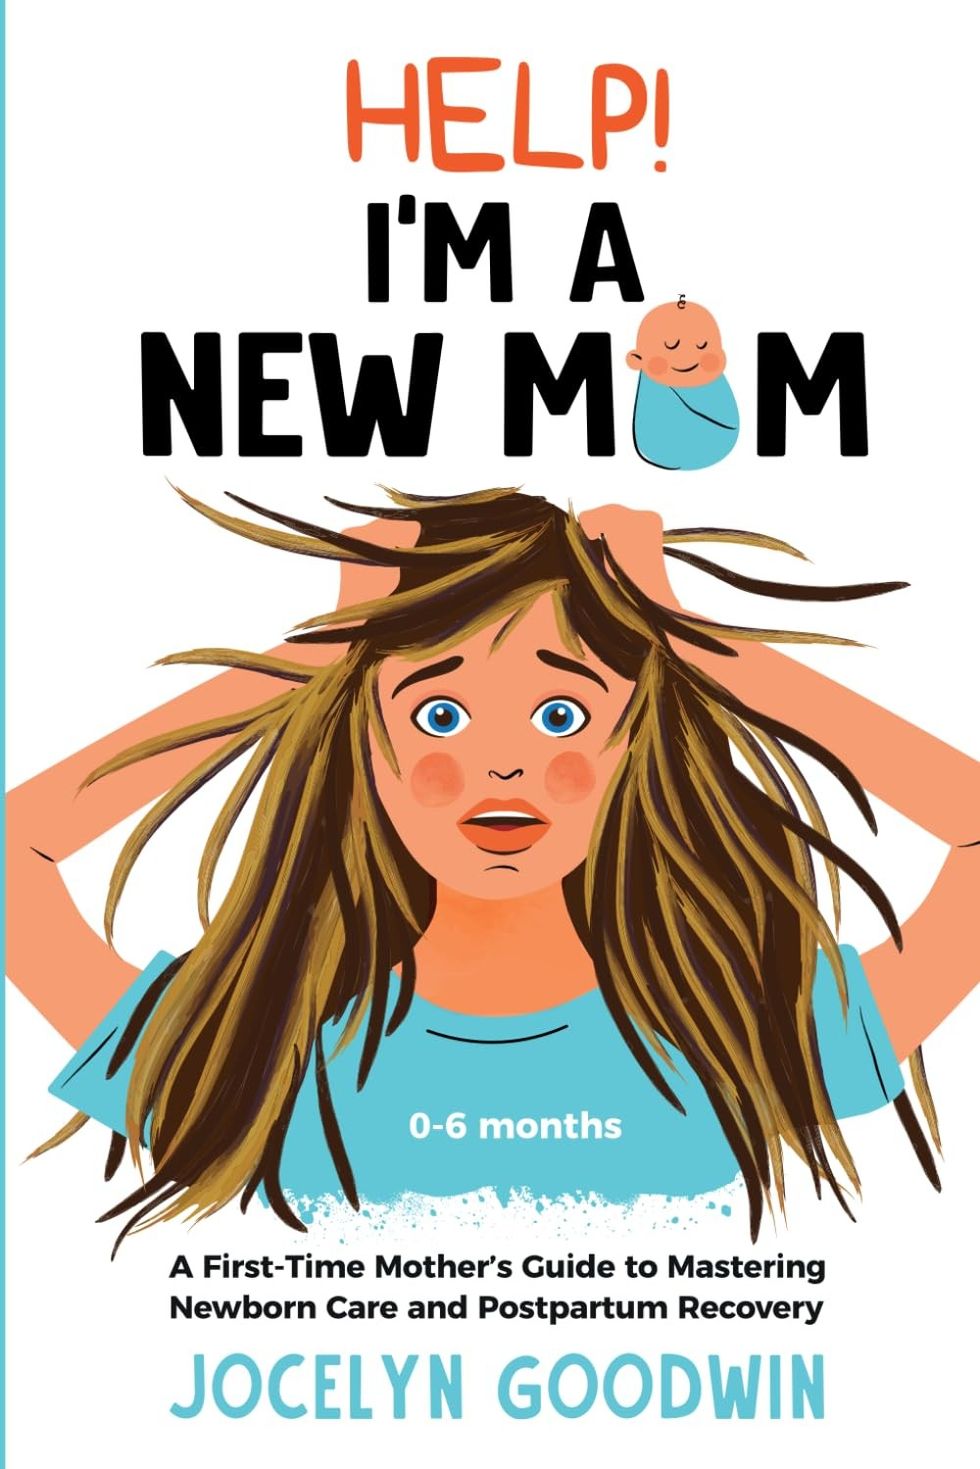 \u200b\u200bHelp! I'm A New Mom: A First-Time Mother's Guide to Mastering Newborn Care and Postpartum Recovery